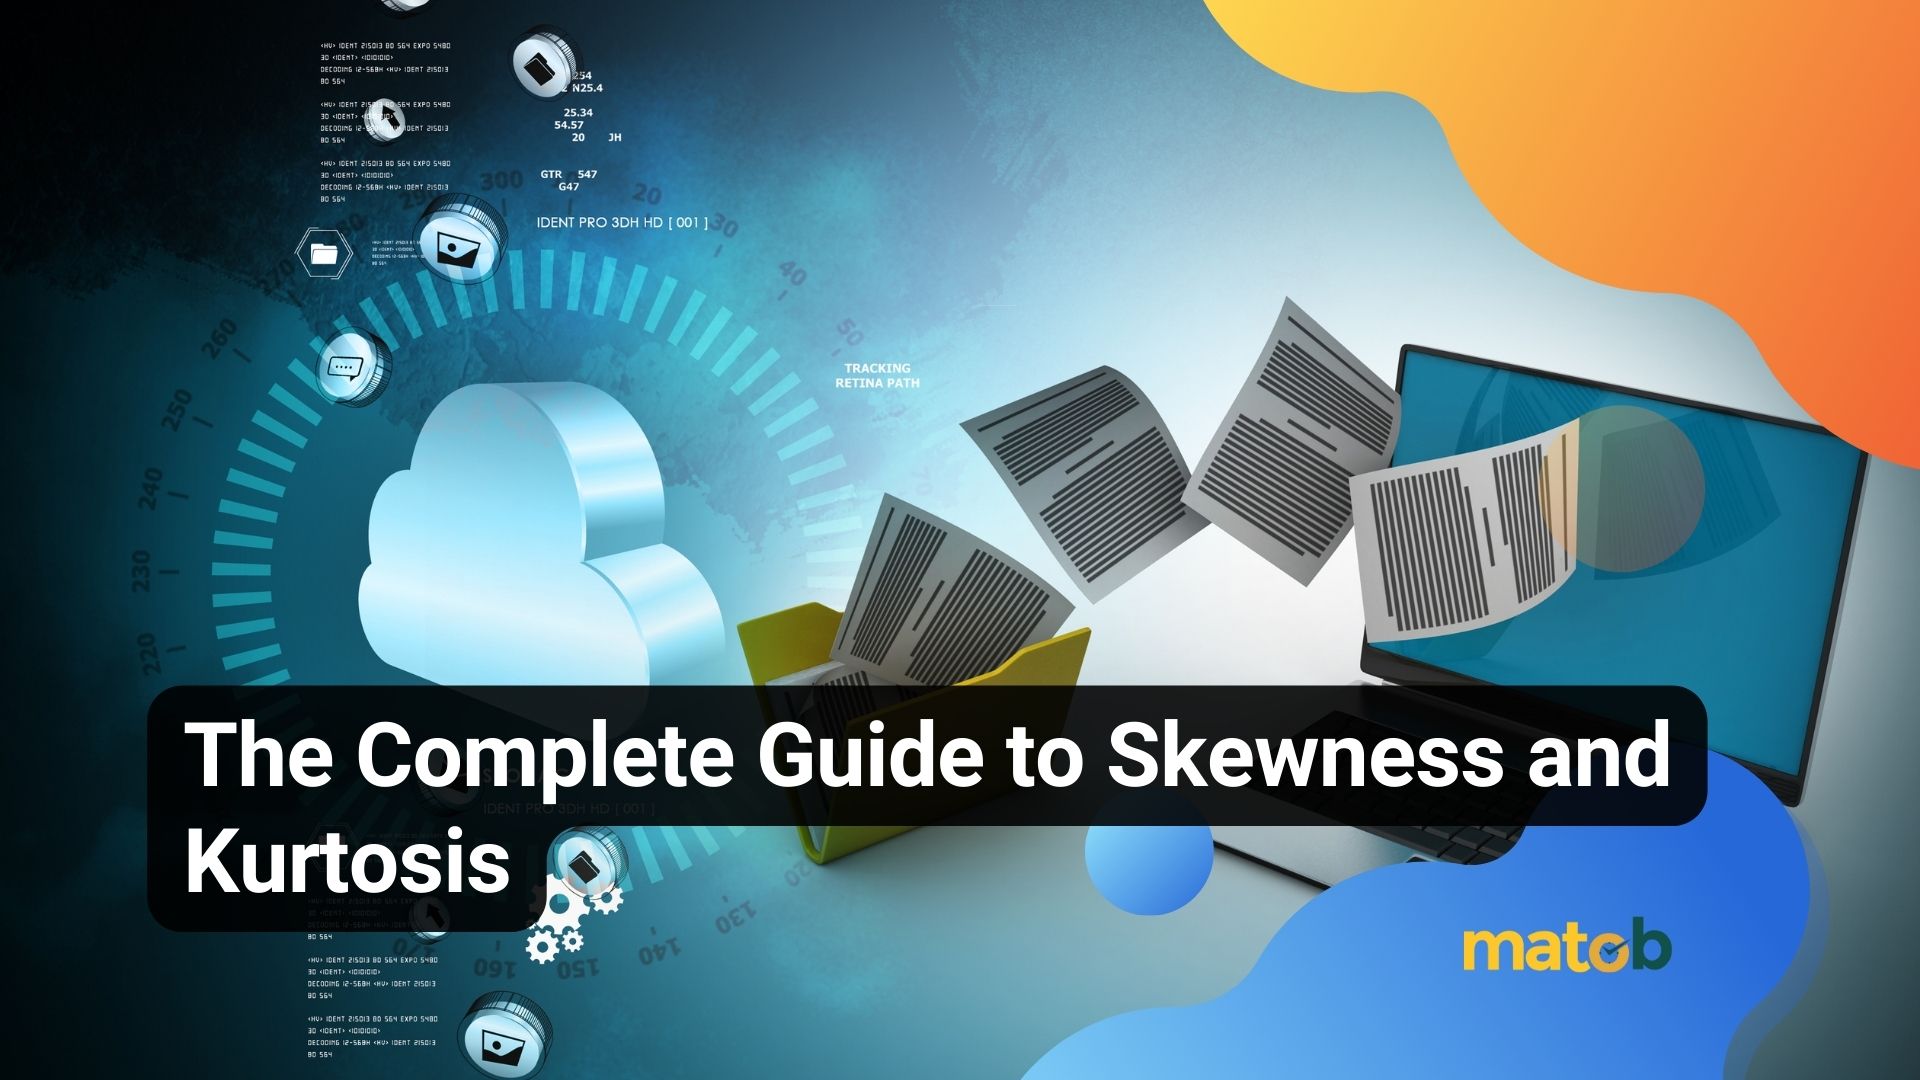 The Complete Guide to Skewness and Kurtosis